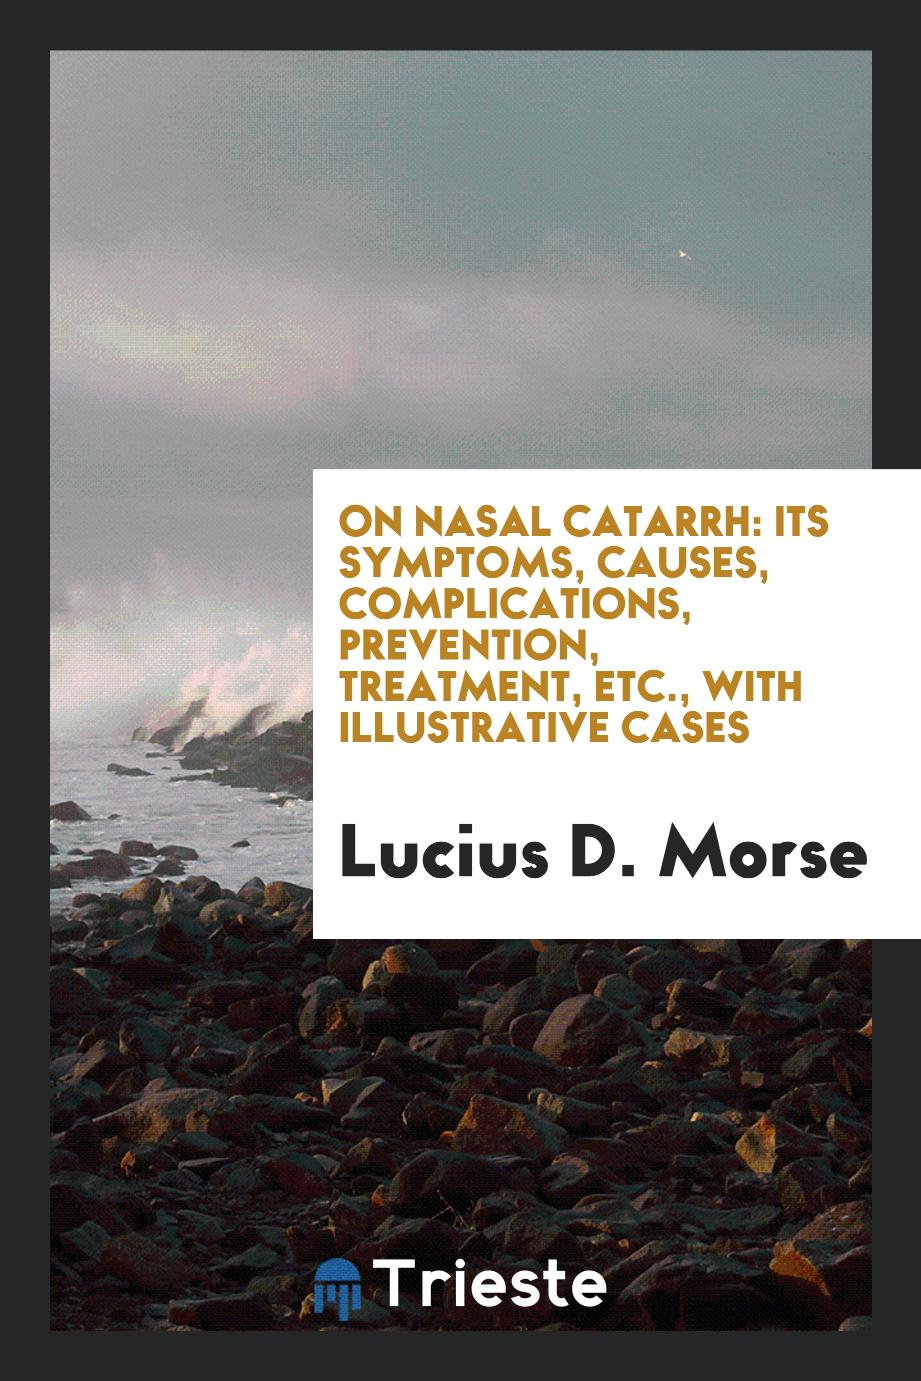 On Nasal Catarrh: Its Symptoms, Causes, Complications, Prevention, Treatment, Etc., with illustrative cases